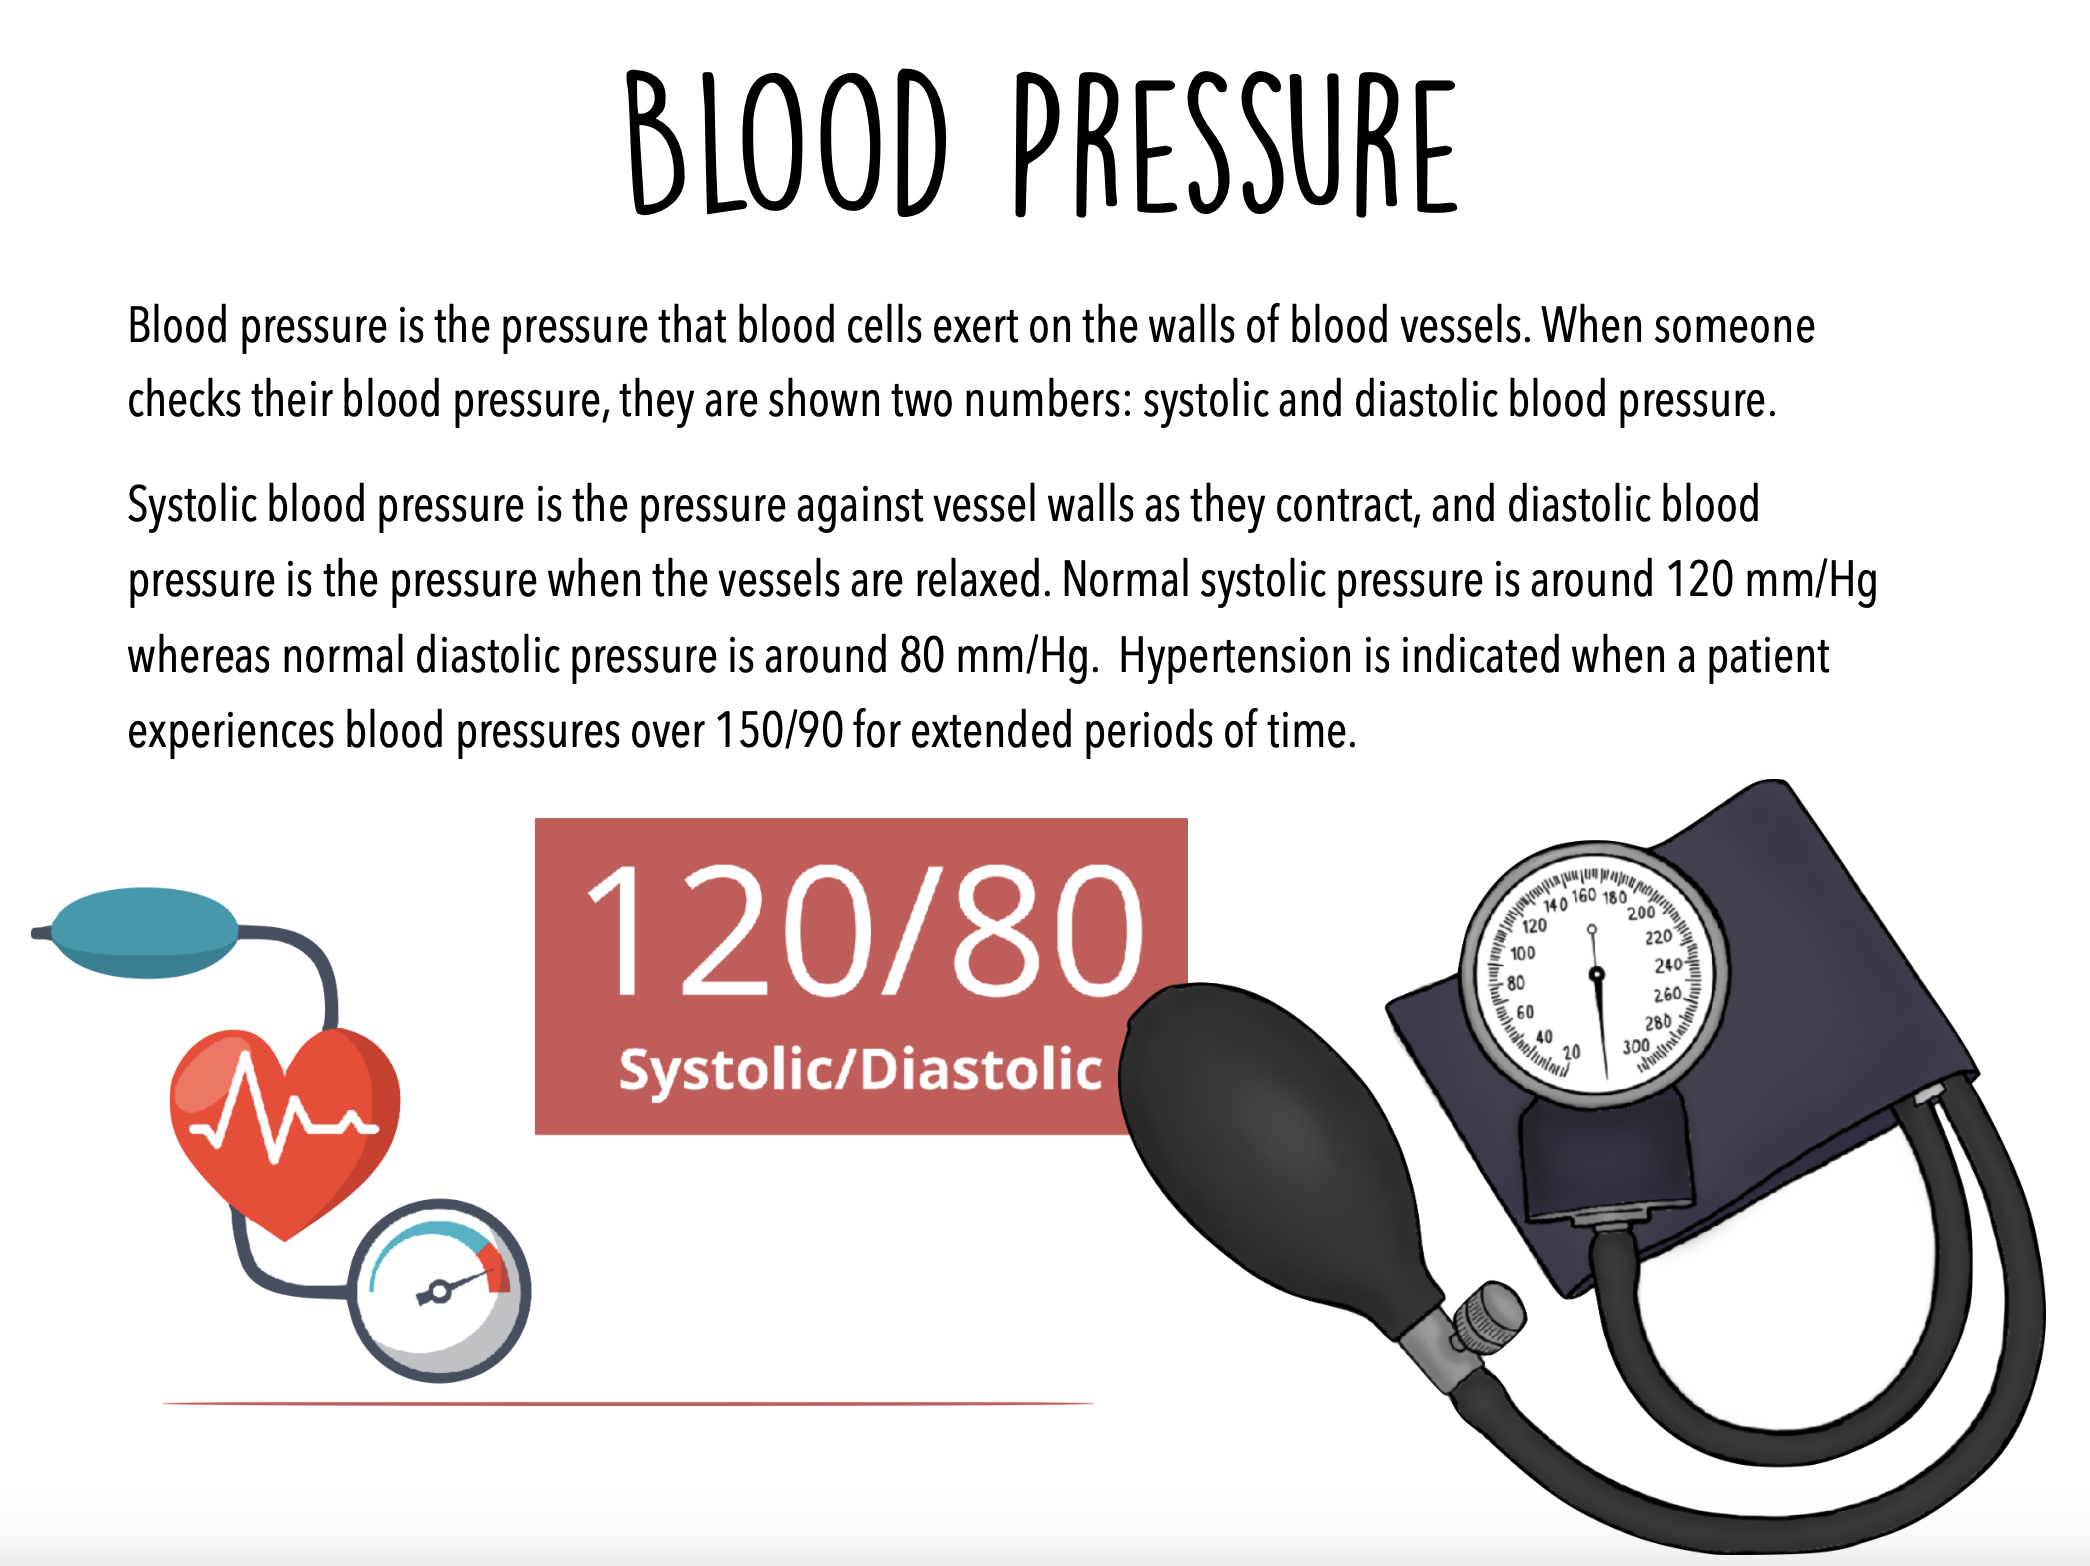 Sample page from the book on blood pressure